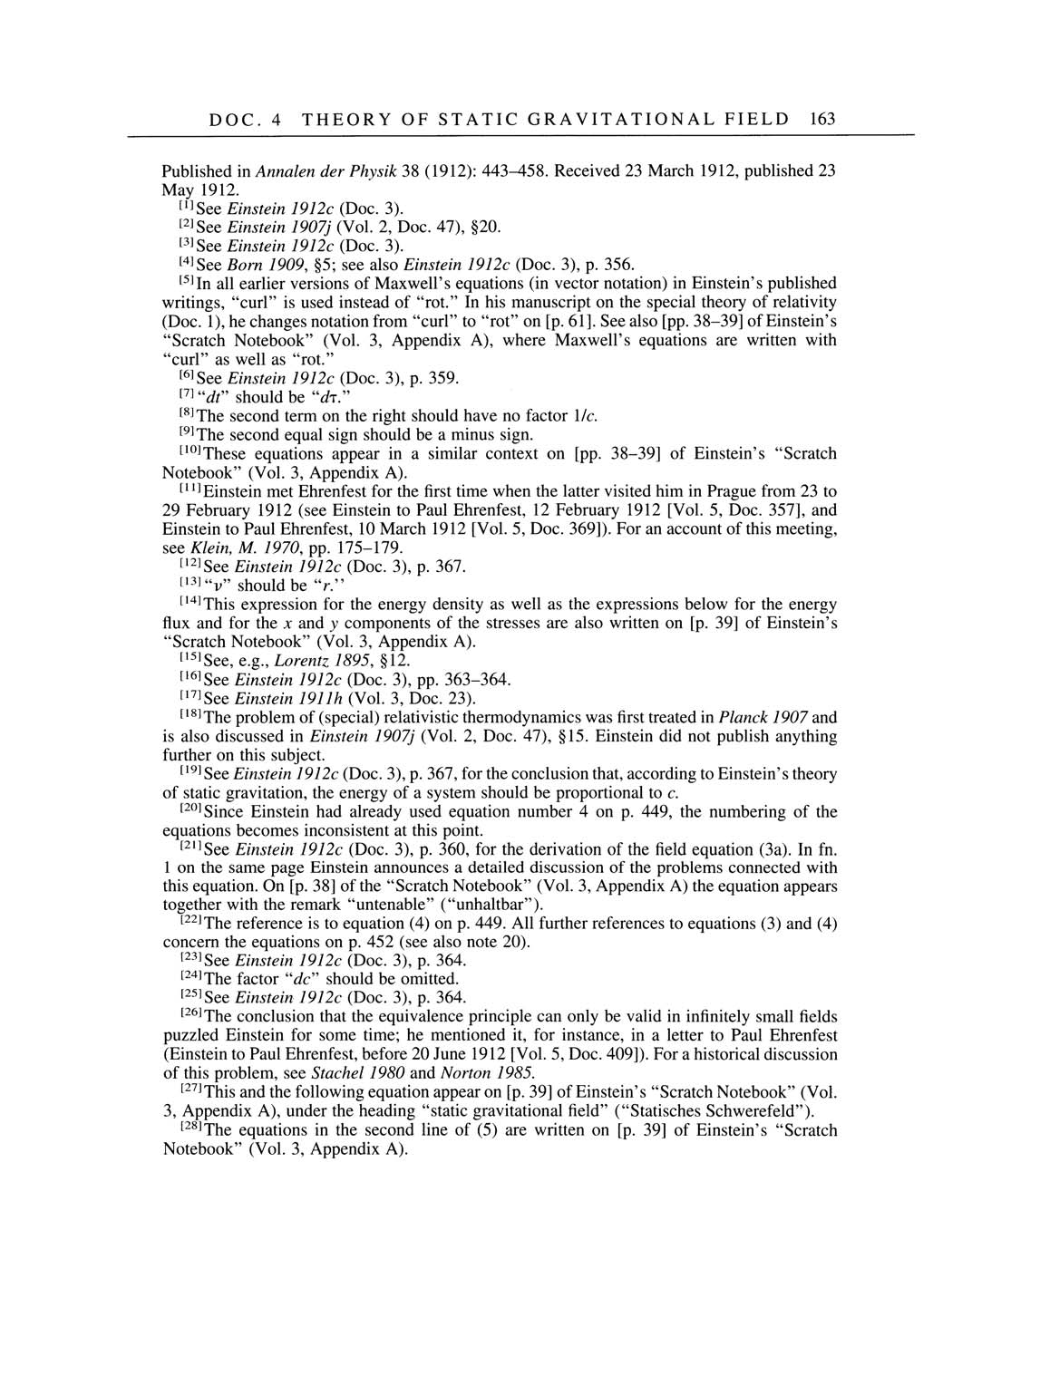 Volume 4: The Swiss Years: Writings 1912-1914 page 163